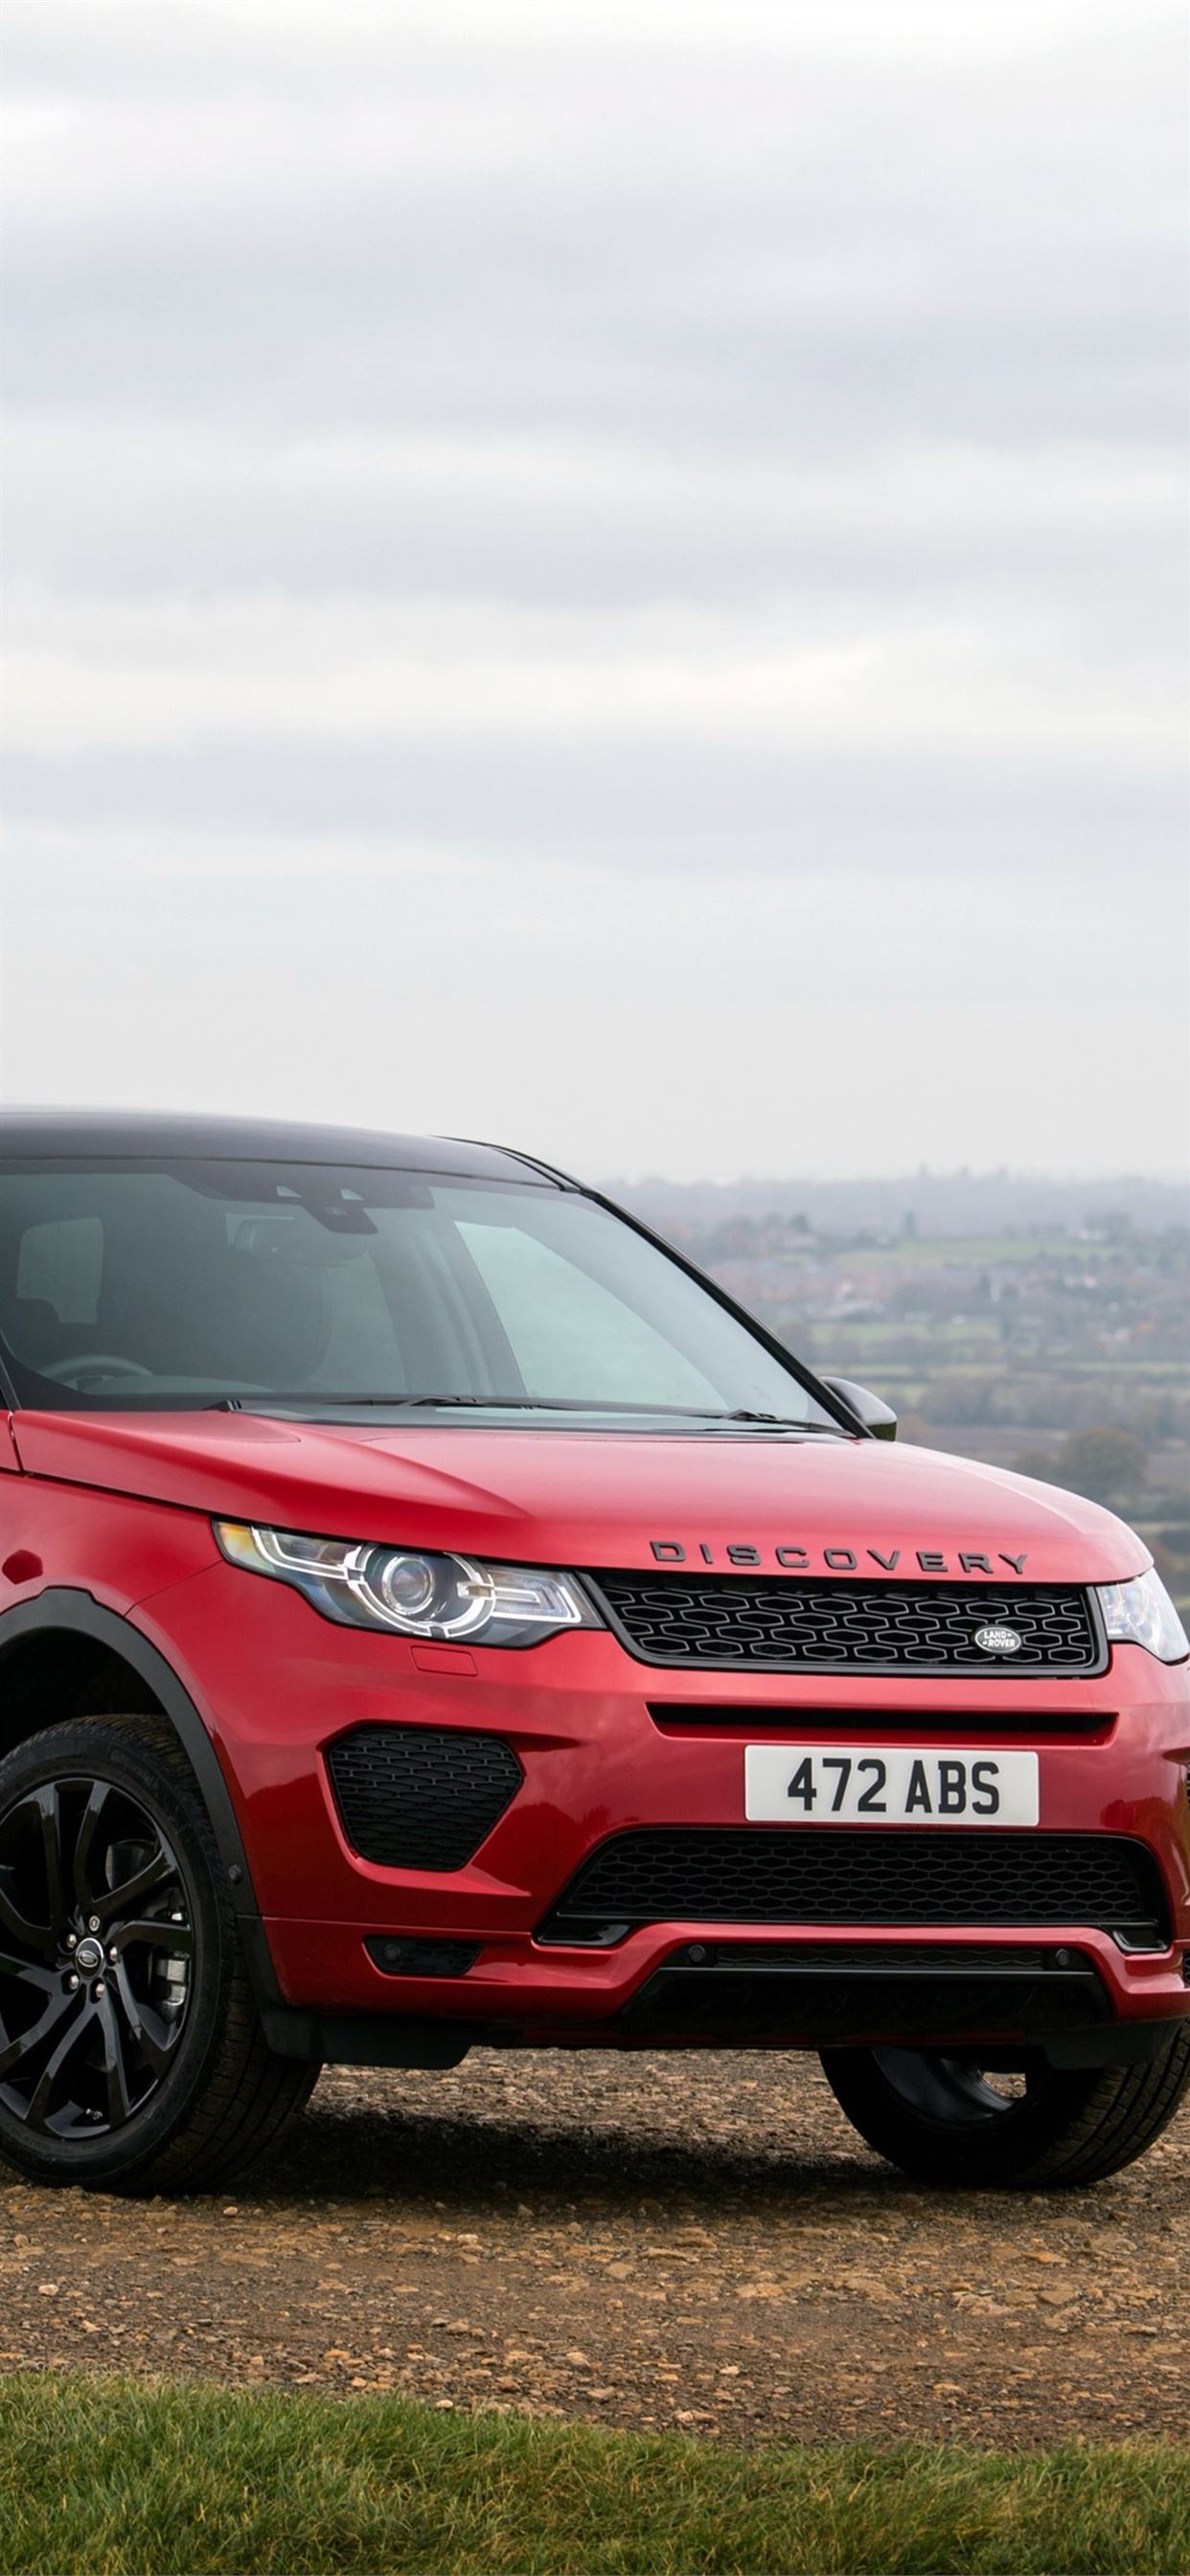 Land Rover Discovery sport, Stunning iPhone wallpapers, Adventure awaits, 1250x2690 HD Handy